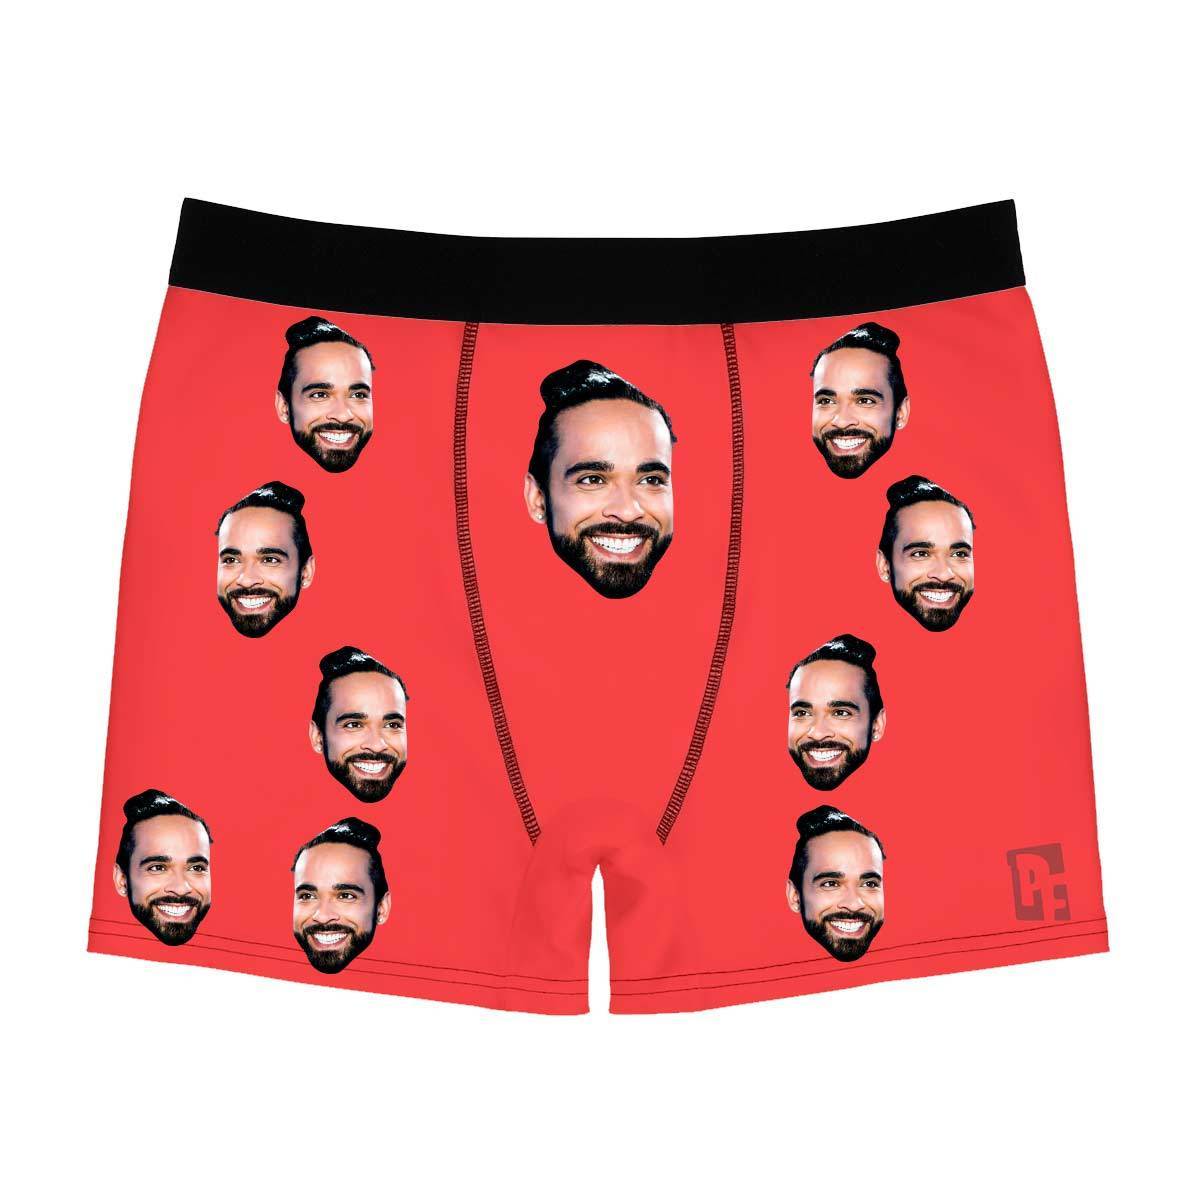 Blue Blank Design men's boxer briefs personalized with photo printed on them